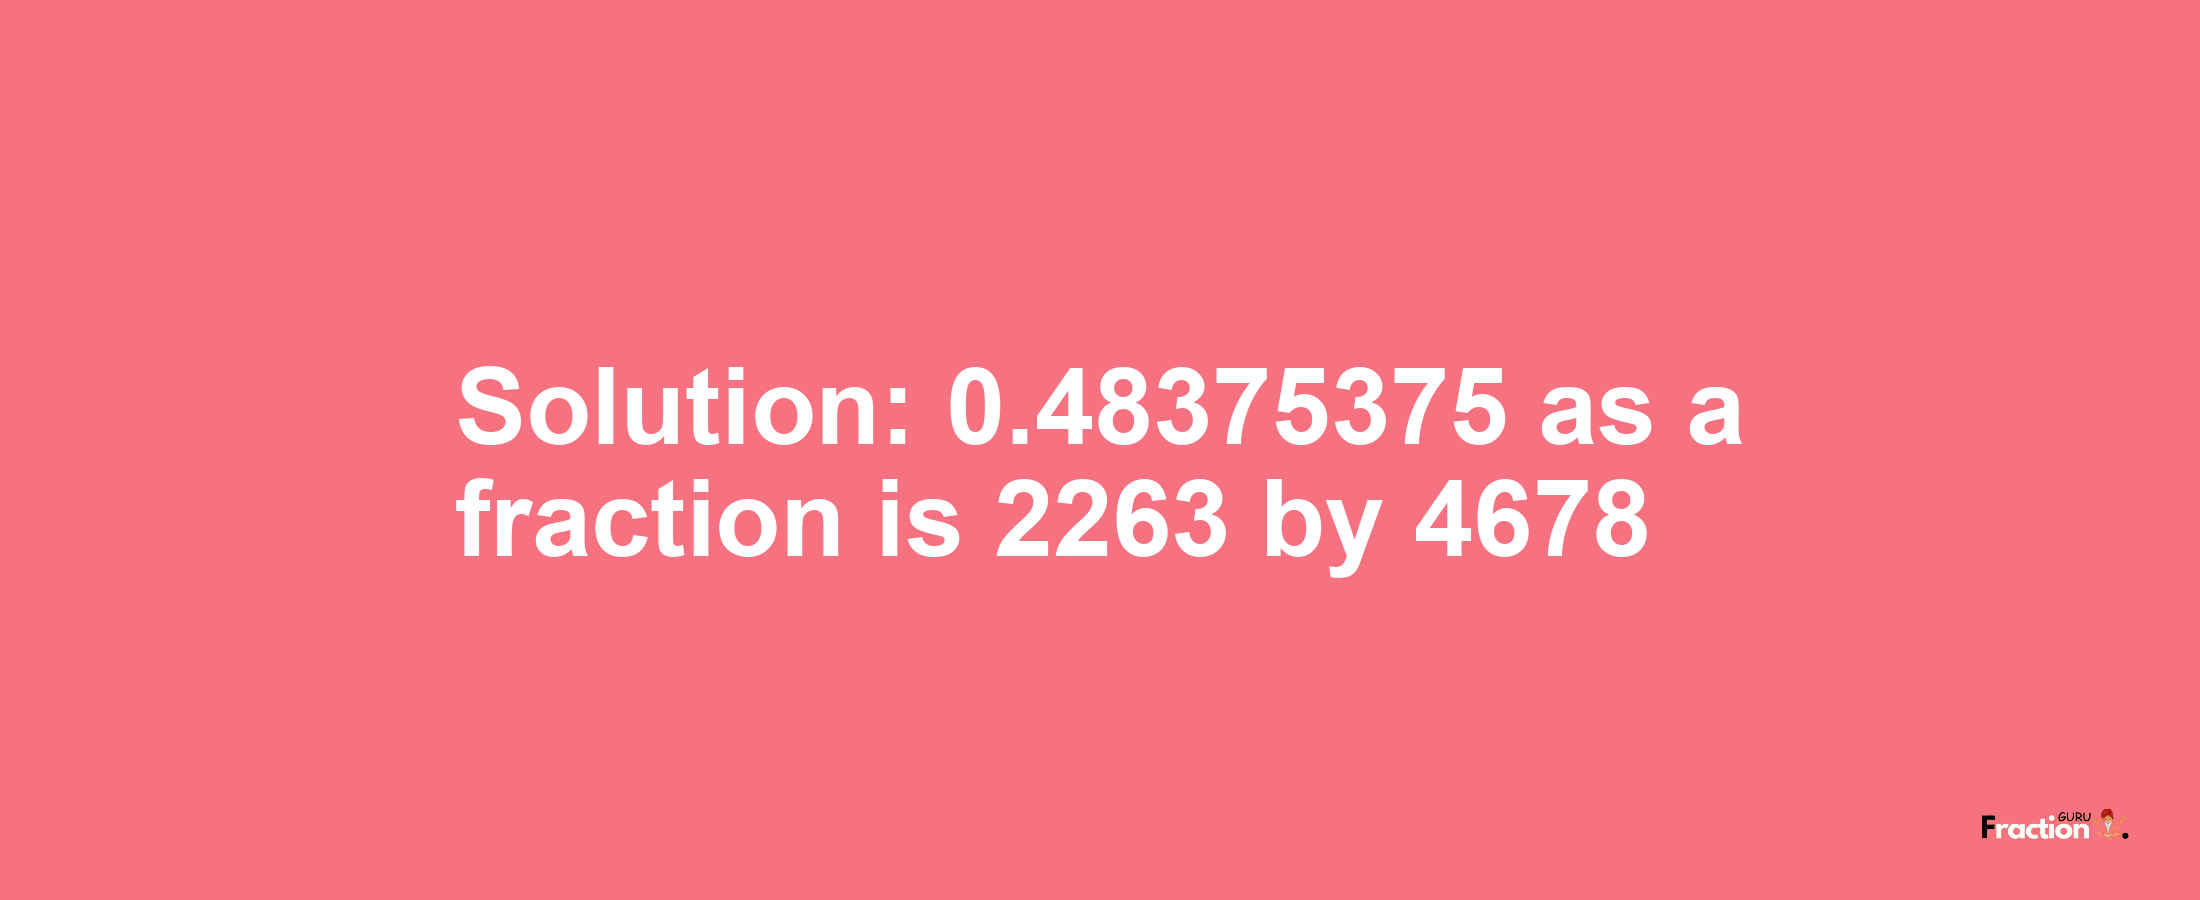 Solution:0.48375375 as a fraction is 2263/4678